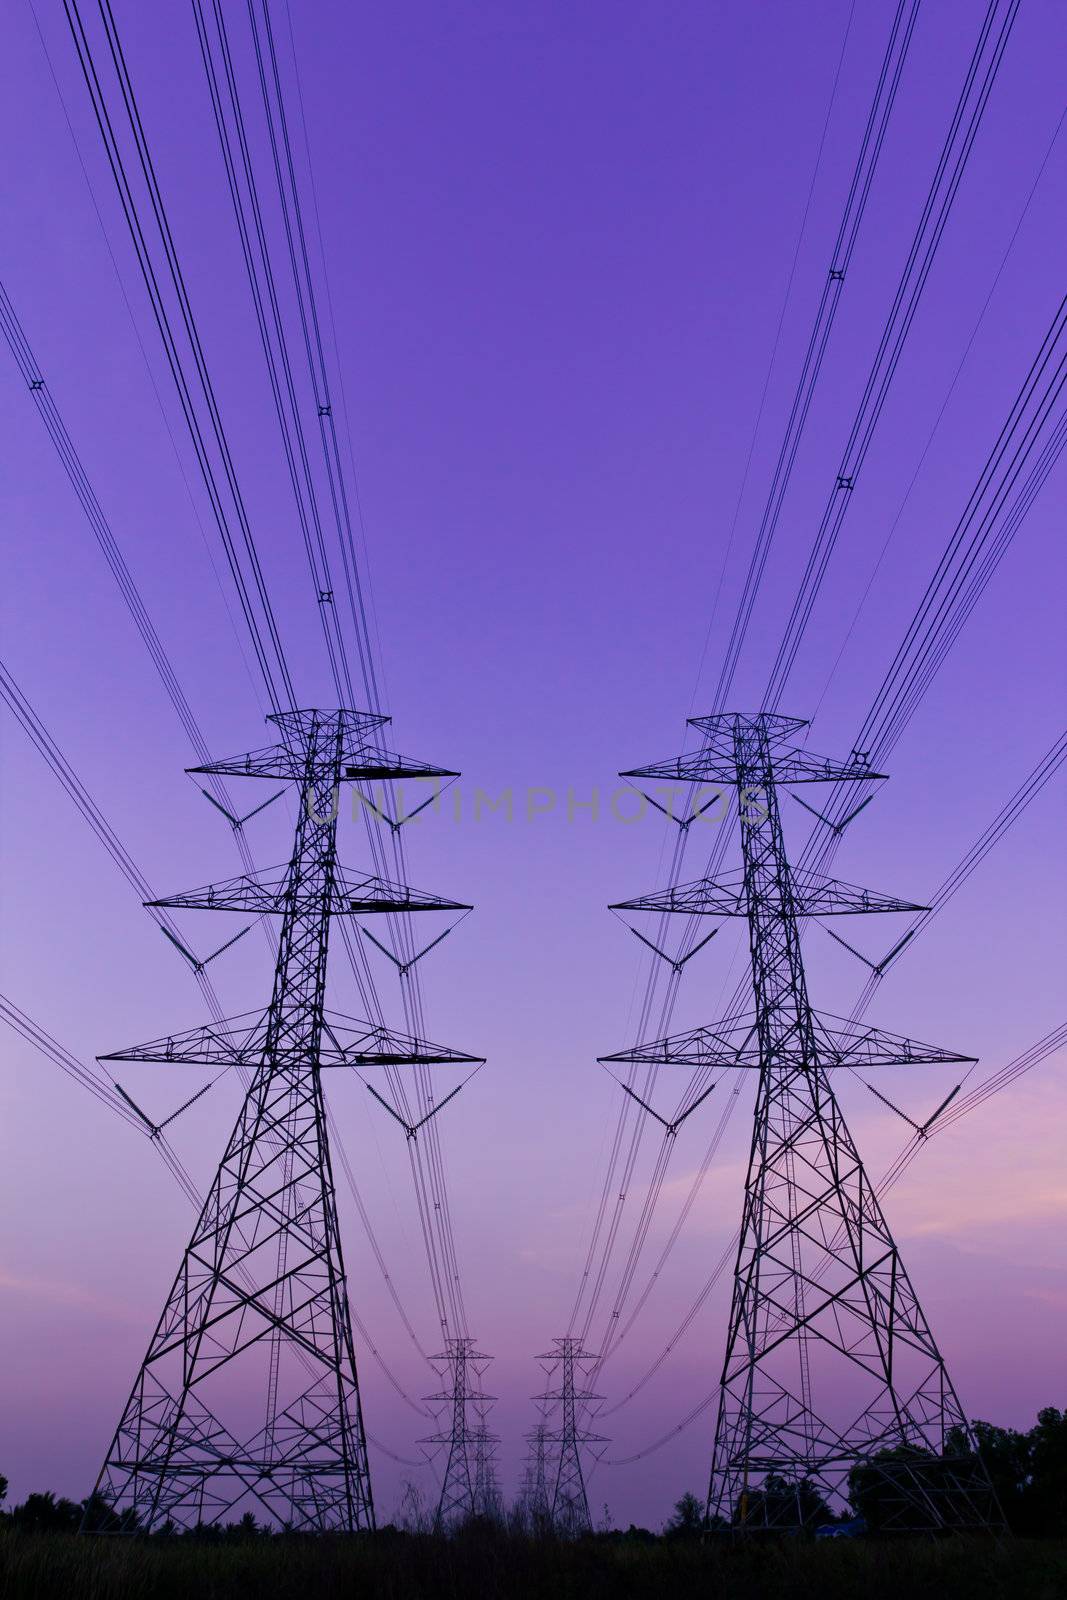 electrical high voltage power pylon by tungphoto